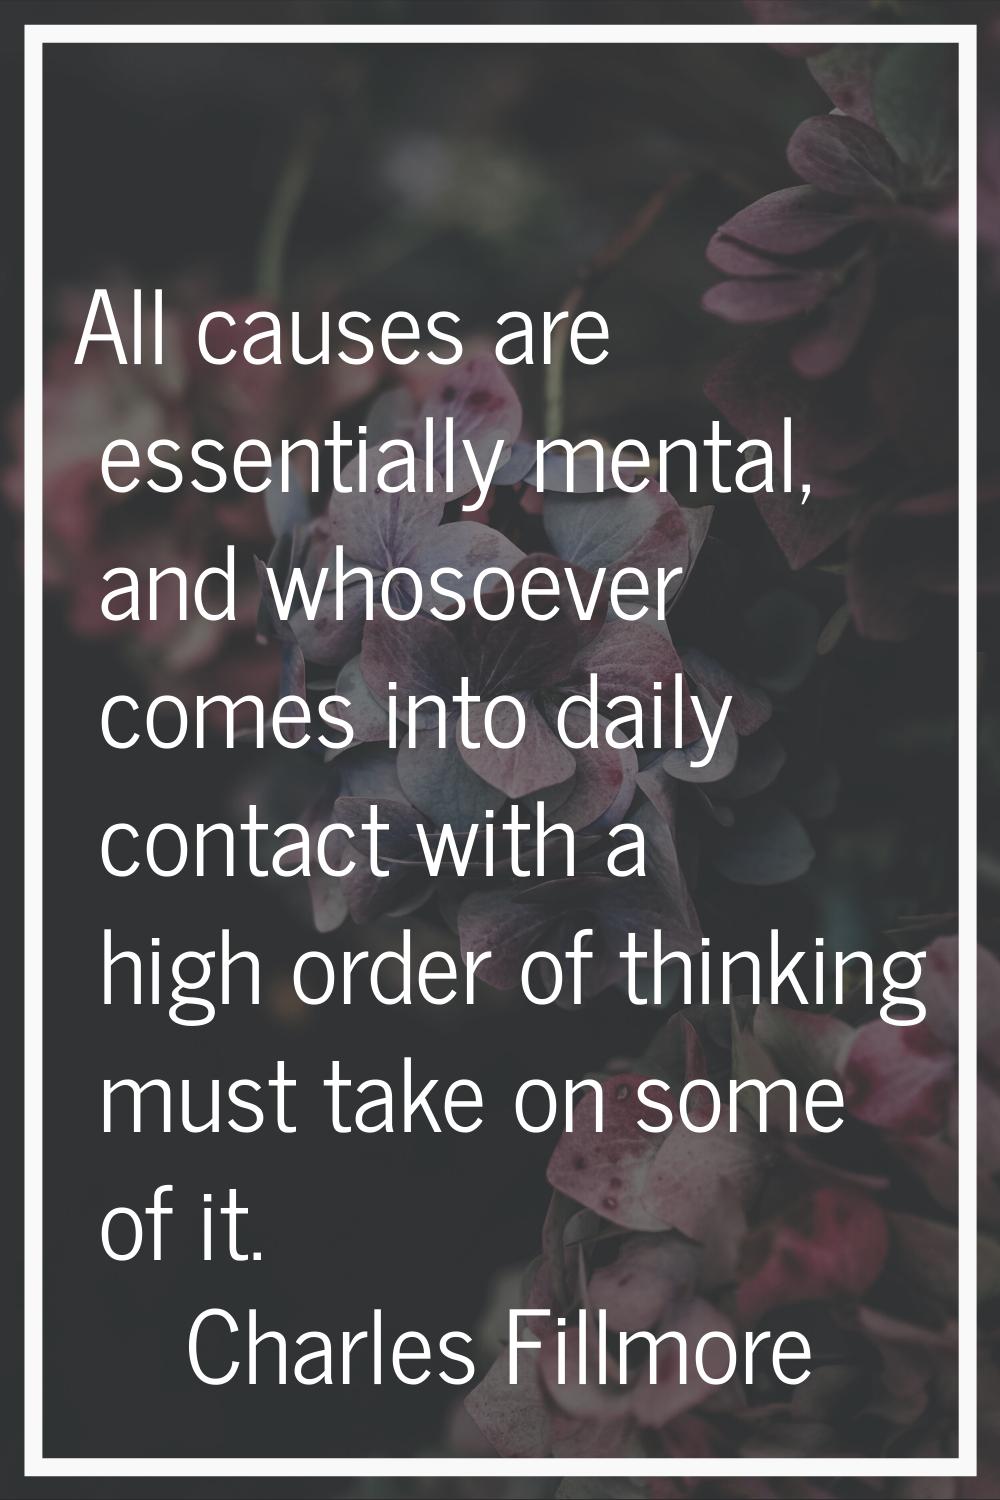 All causes are essentially mental, and whosoever comes into daily contact with a high order of thin